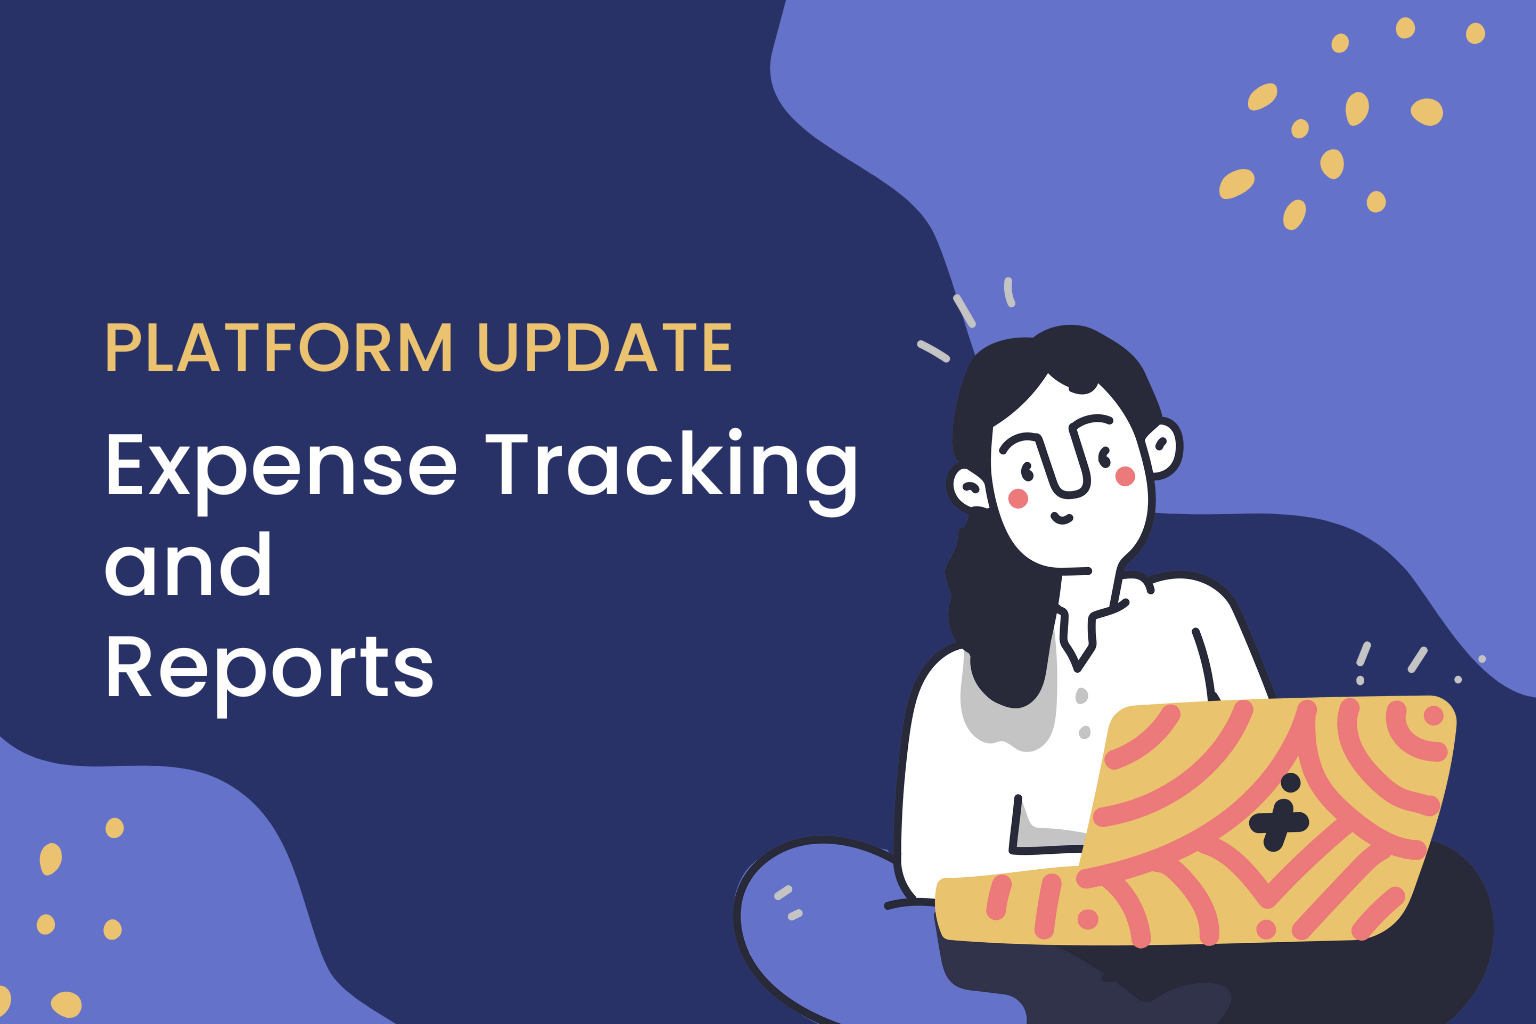 Platform Update: Expense Tracking and Reports